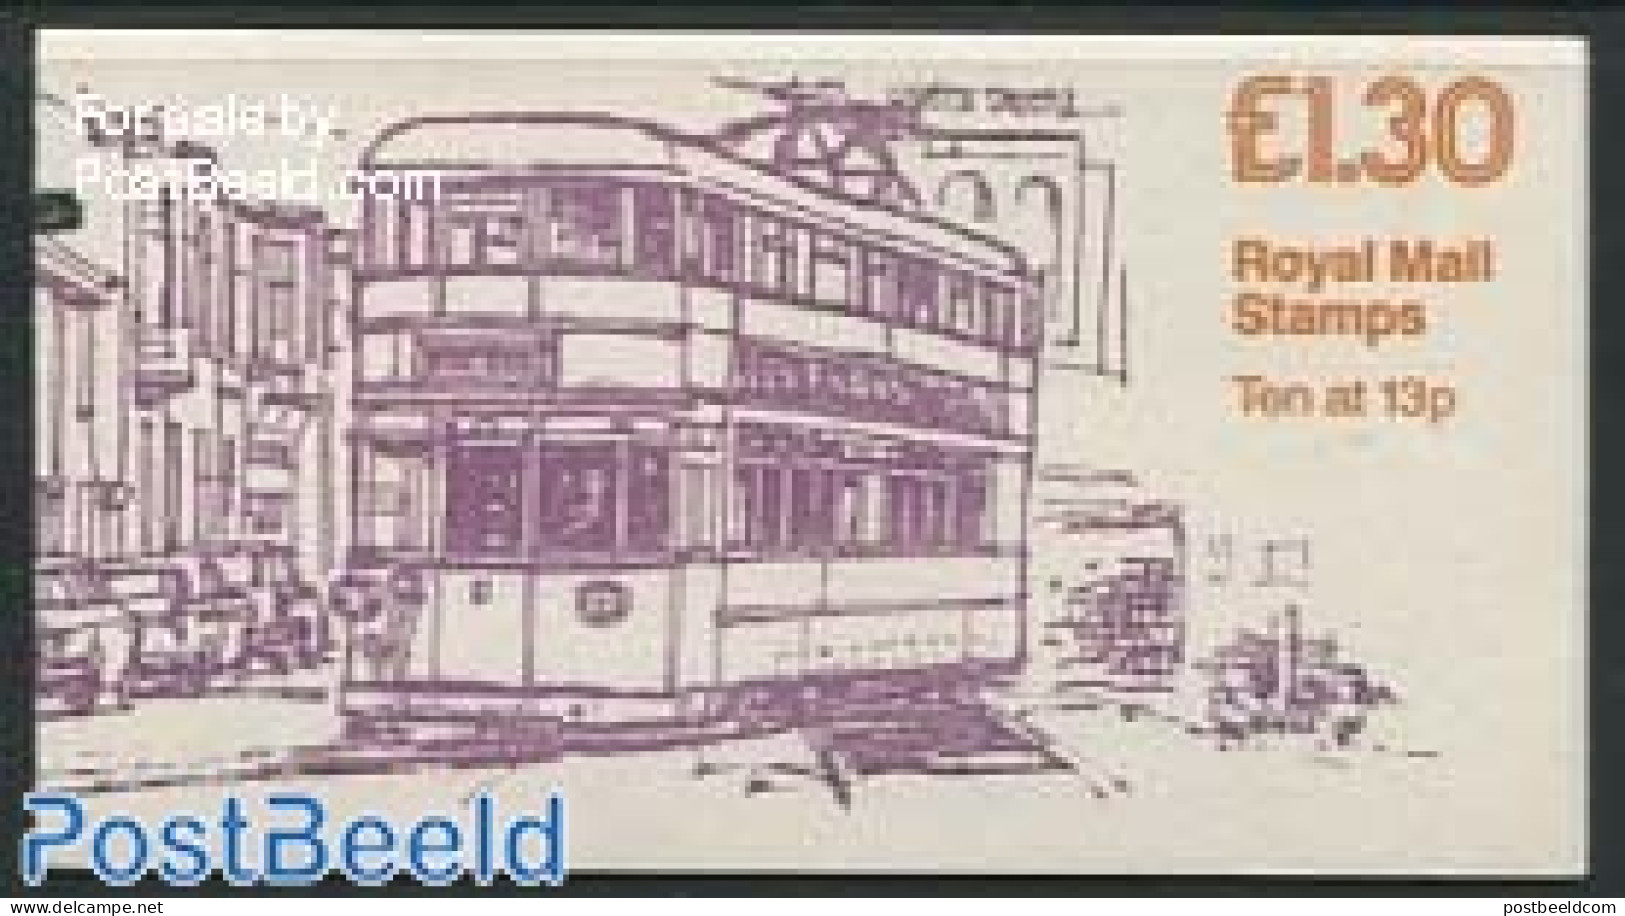 Great Britain 1984 Def. Booklet, Swansea/Mumbles, Selvedge At Right, Mint NH, Transport - Stamp Booklets - Railways - .. - Ungebraucht